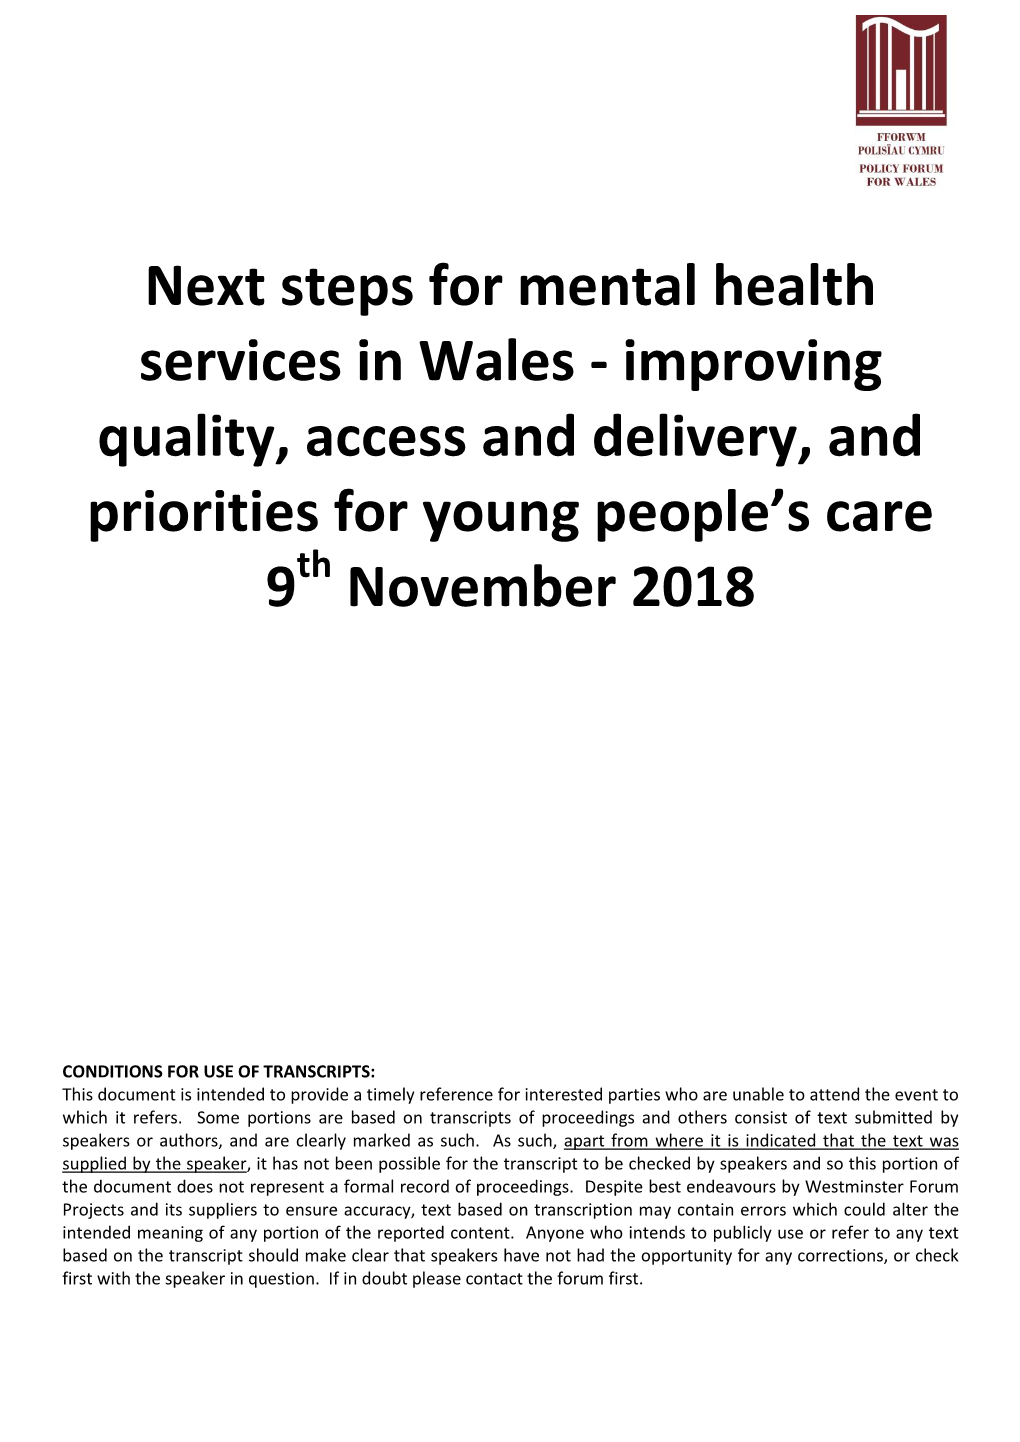 Next Steps for Mental Health Services in Wales - Improving Quality, Access and Delivery, and Priorities for Young People’S Care 9Th November 2018